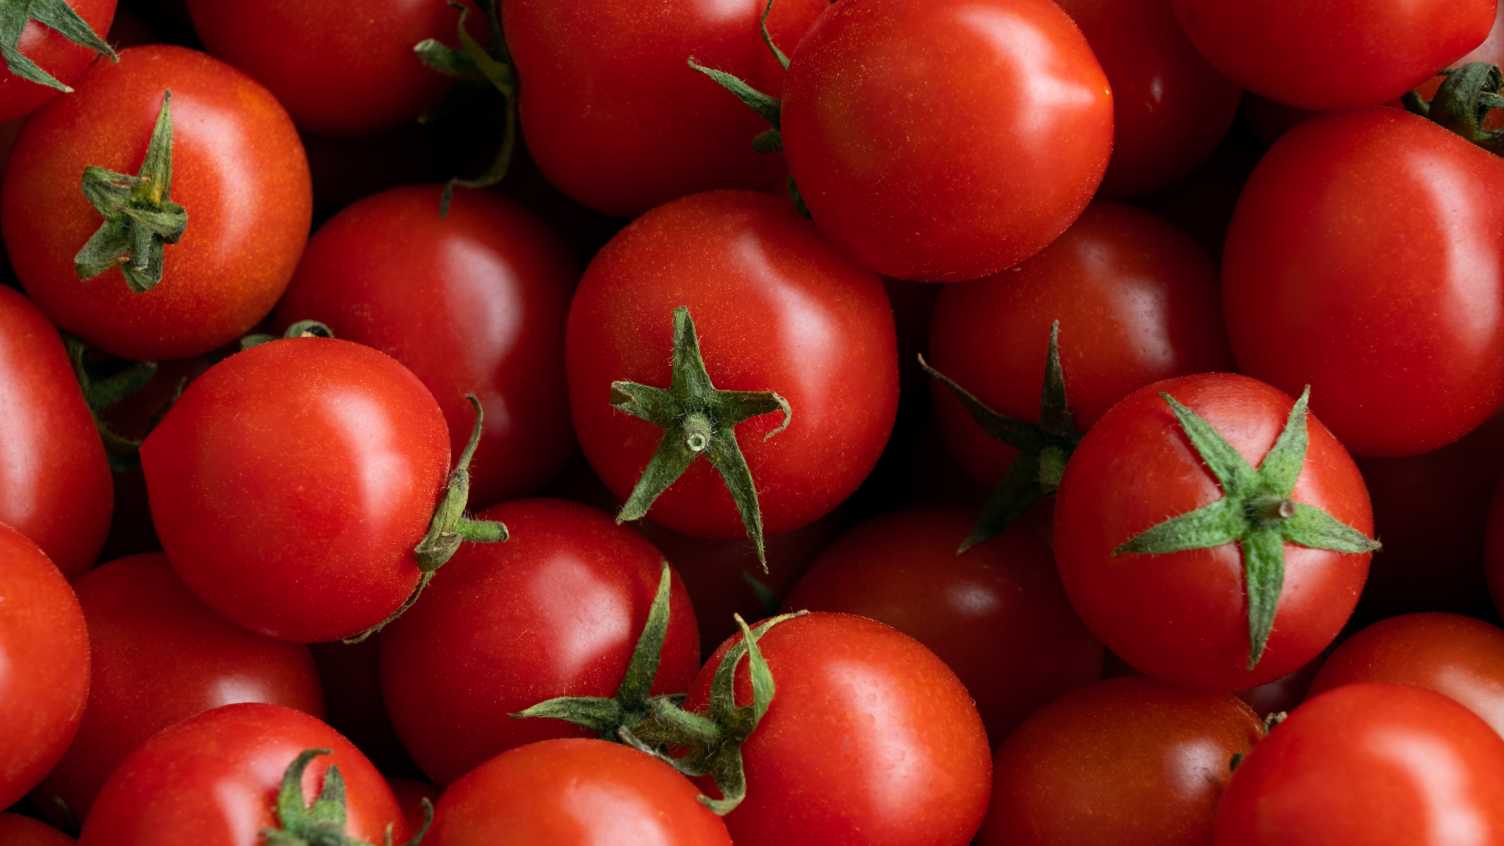 Tomato dietary supplement studied for male fertility